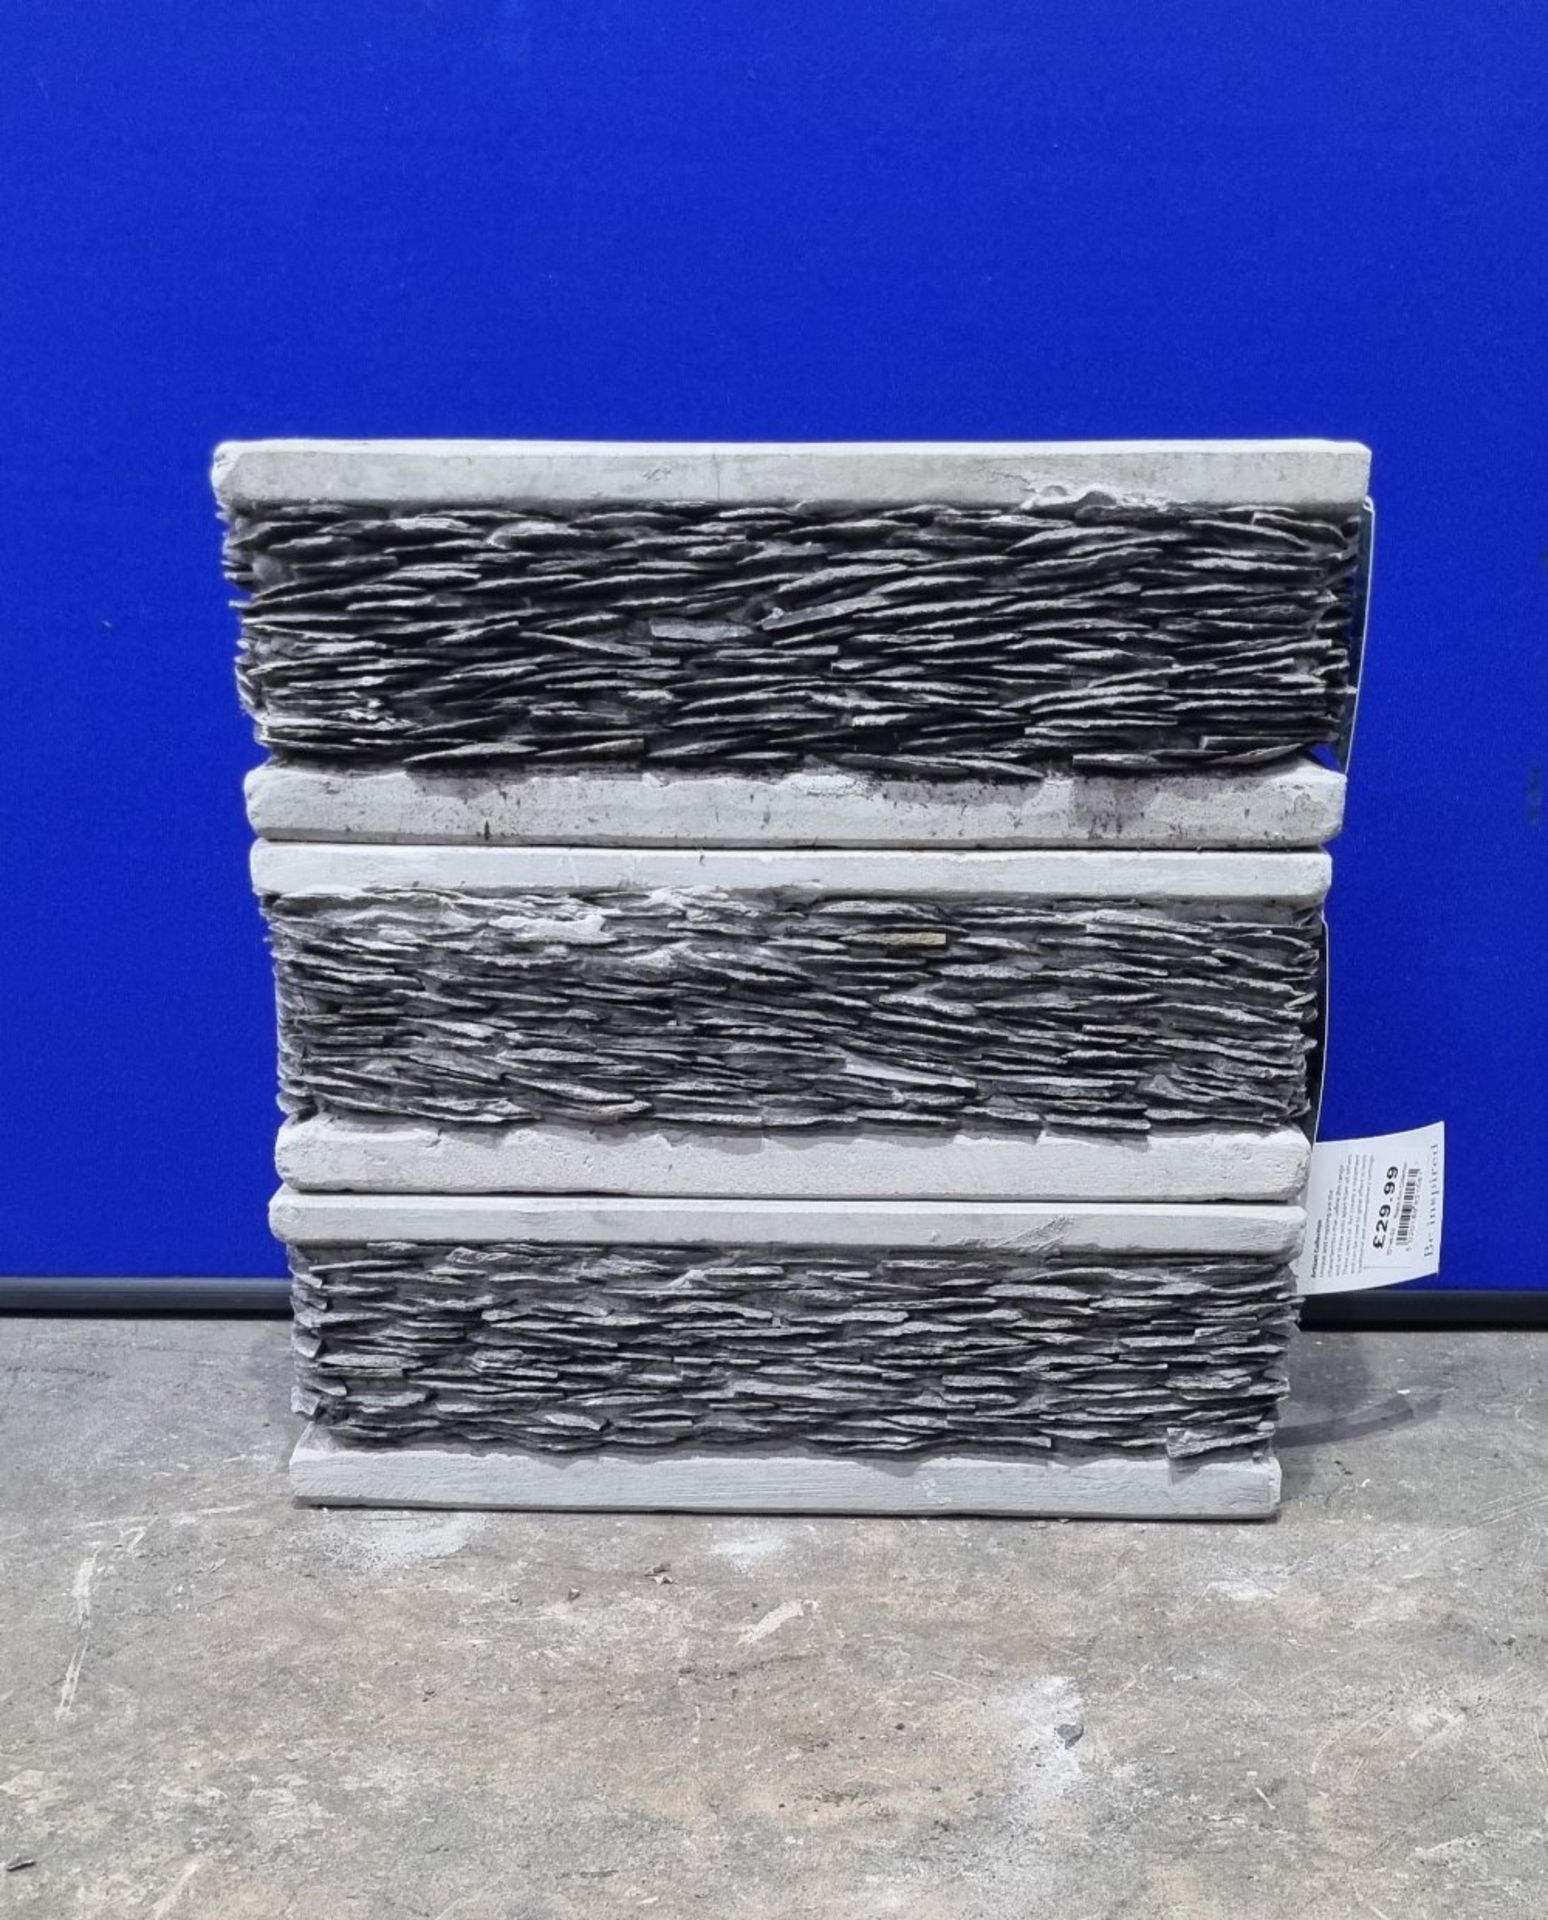 3 x Mims Artisan Rocca Ann Collection 82146-S2 Slate Planters | 130mm x 410mm | RRP £29.99 each